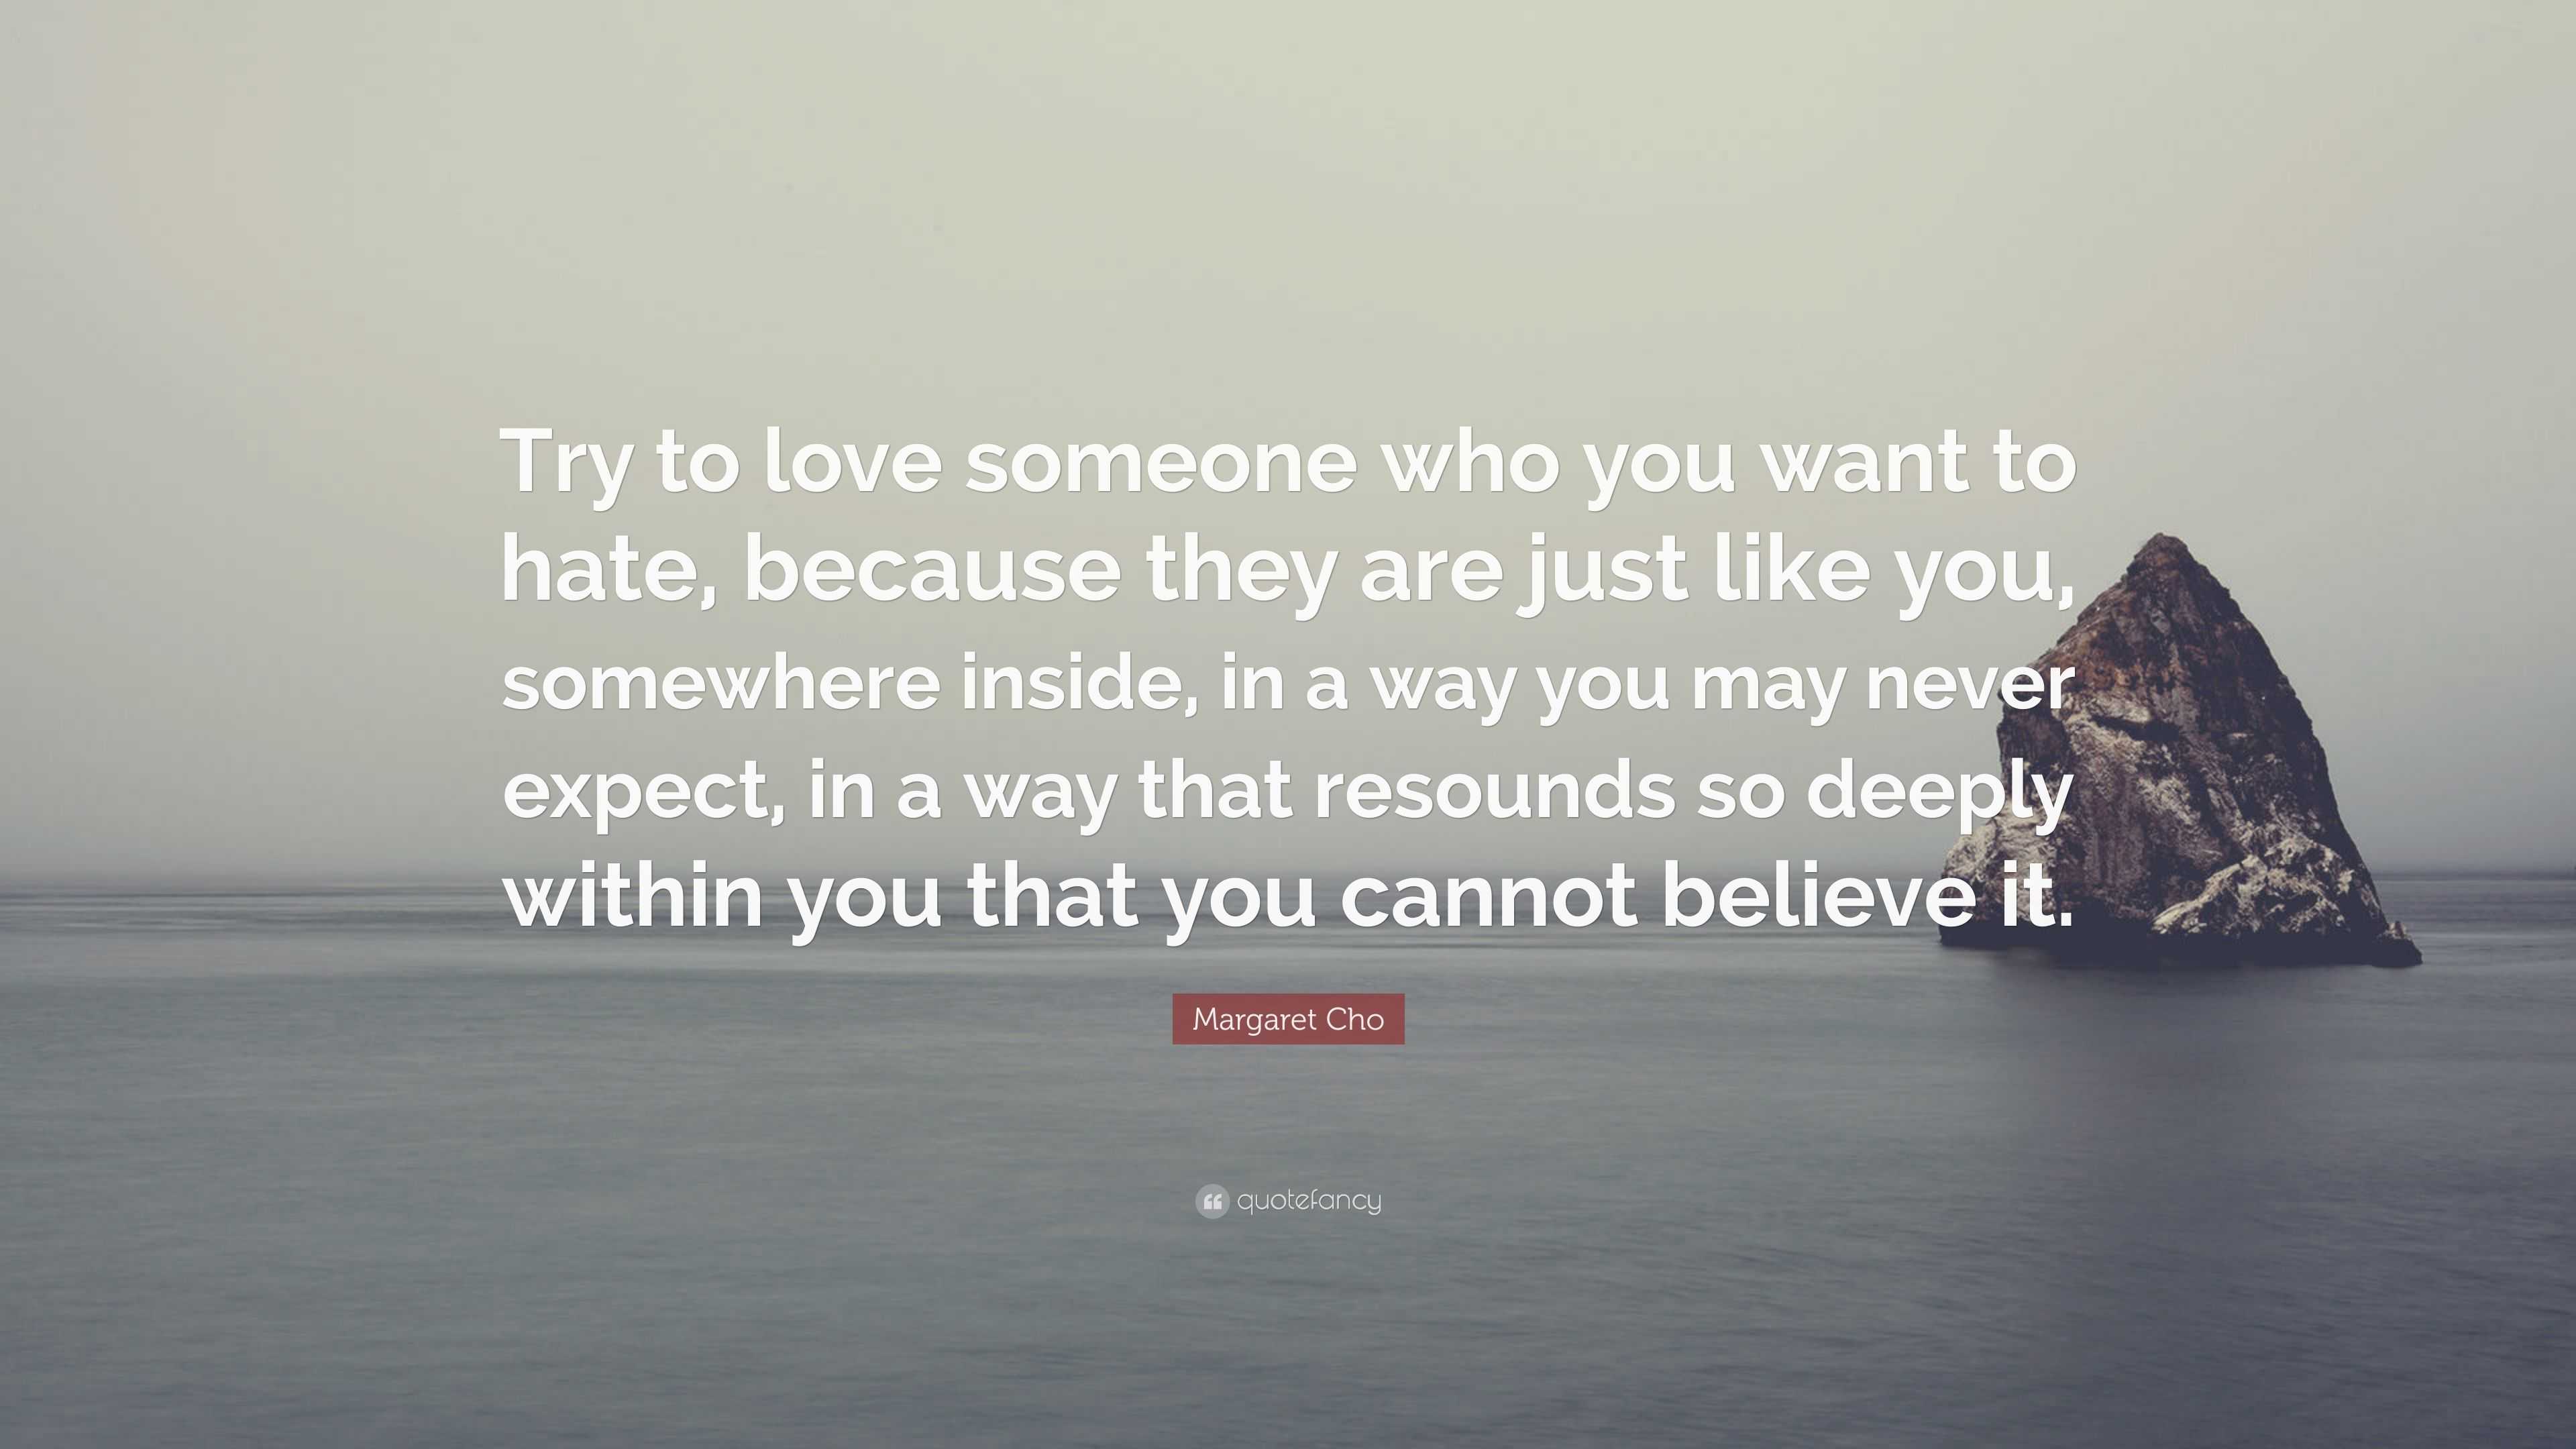 Margaret Cho Quote: “Try to love someone who you want to hate, because ...